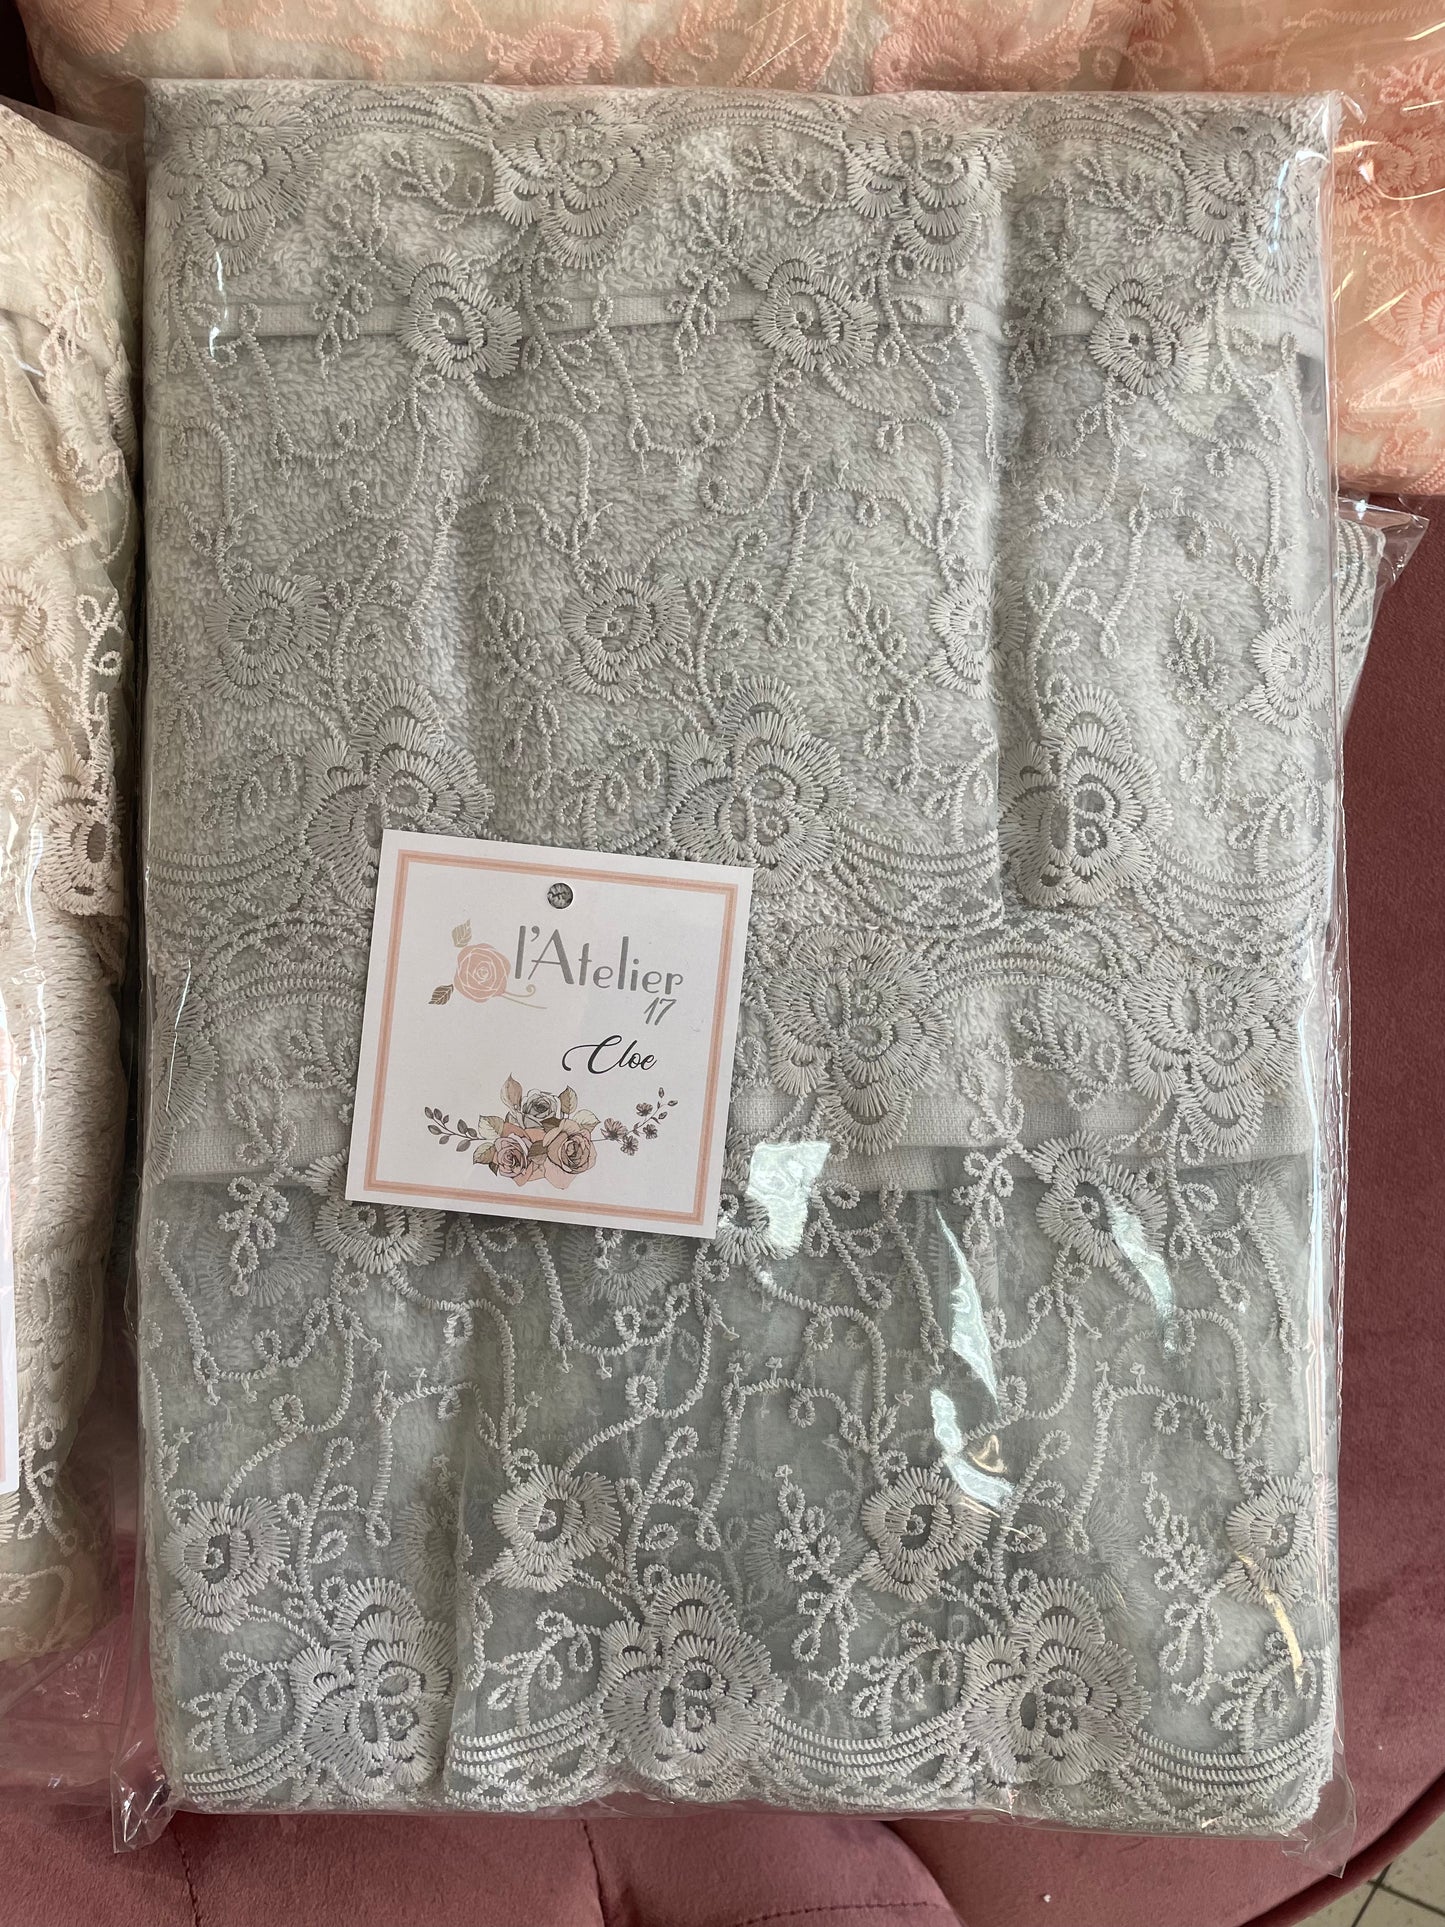 Pair of towels with gray lace Fiori di Lena